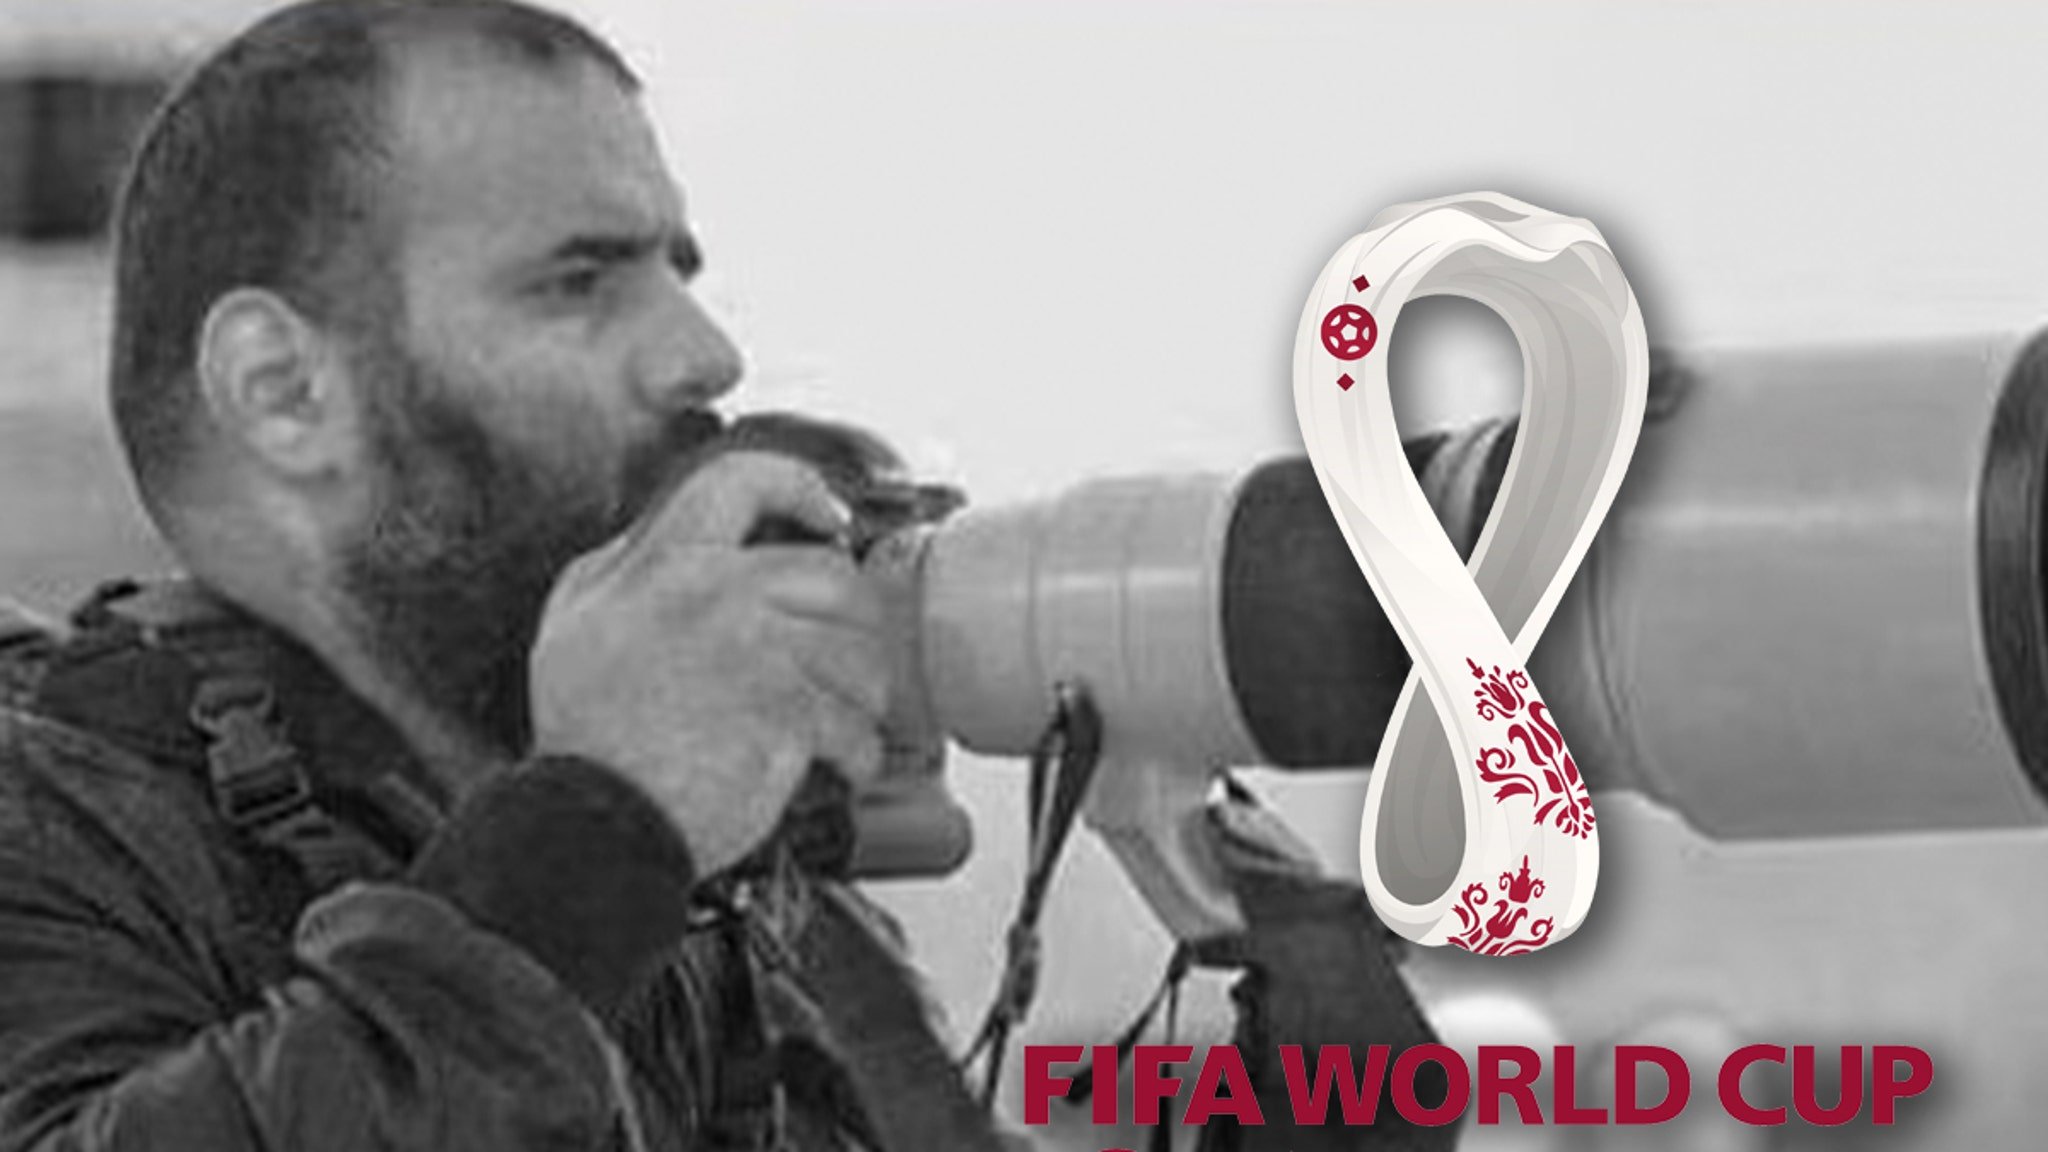 Khalid al-Misslam Photographer Dead ... While Covering World Cup